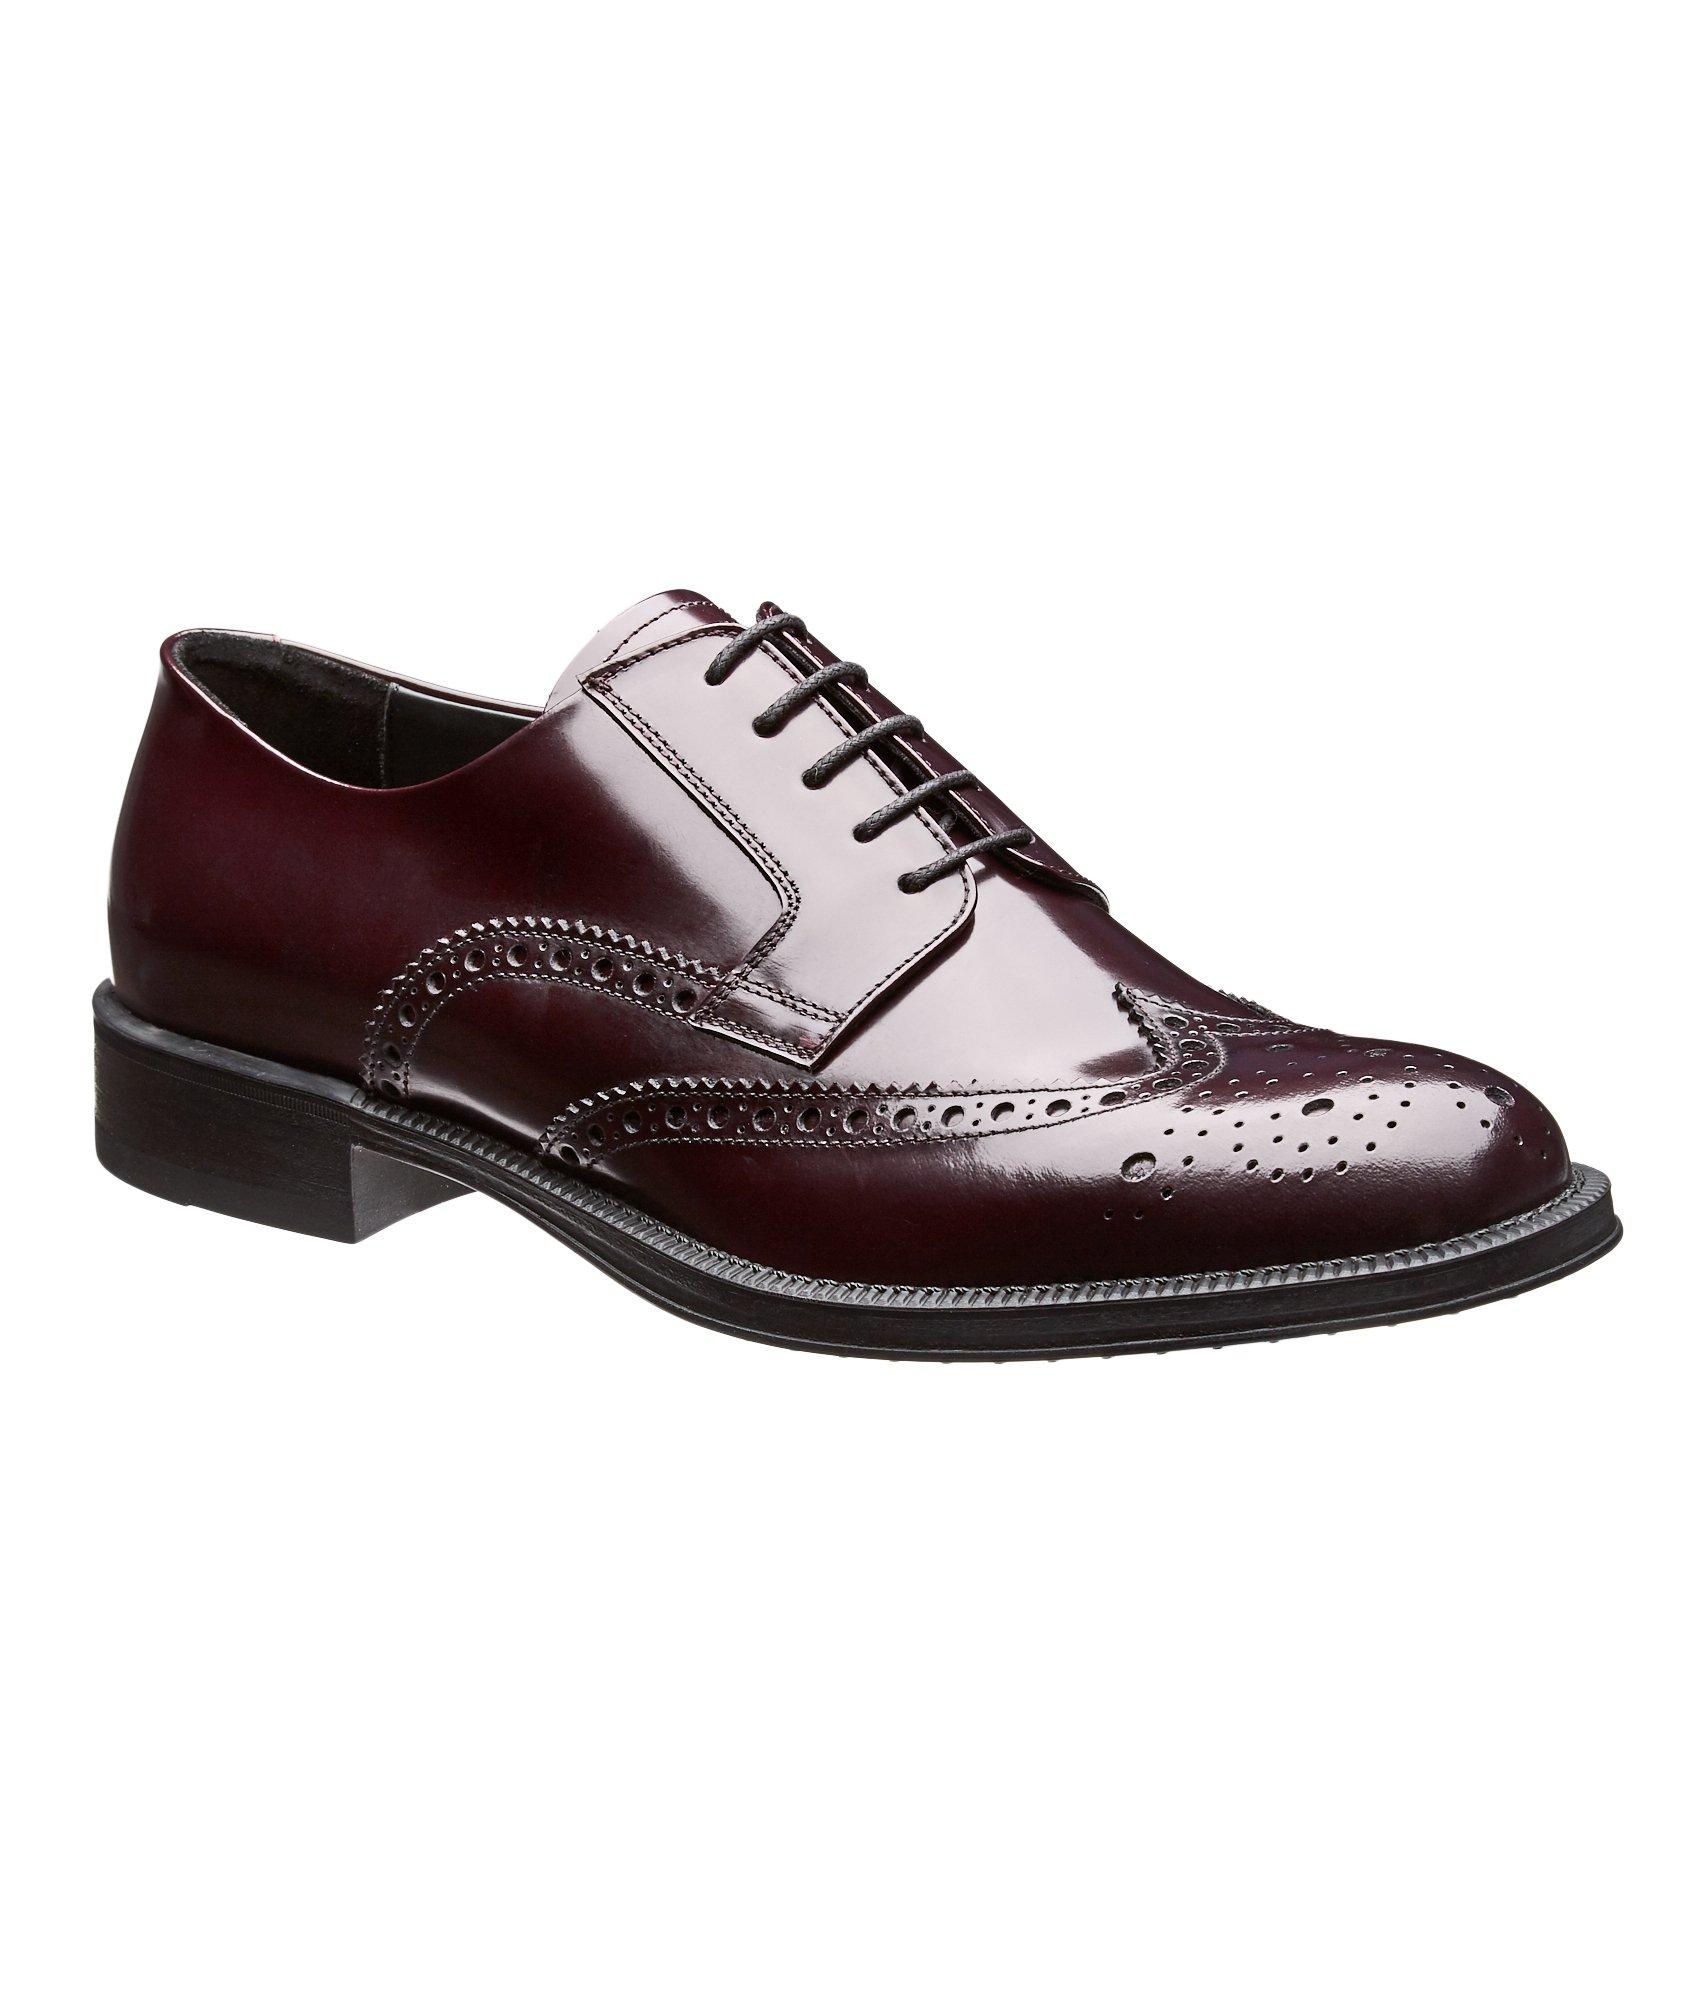 Leather Wingtip Brogues image 0